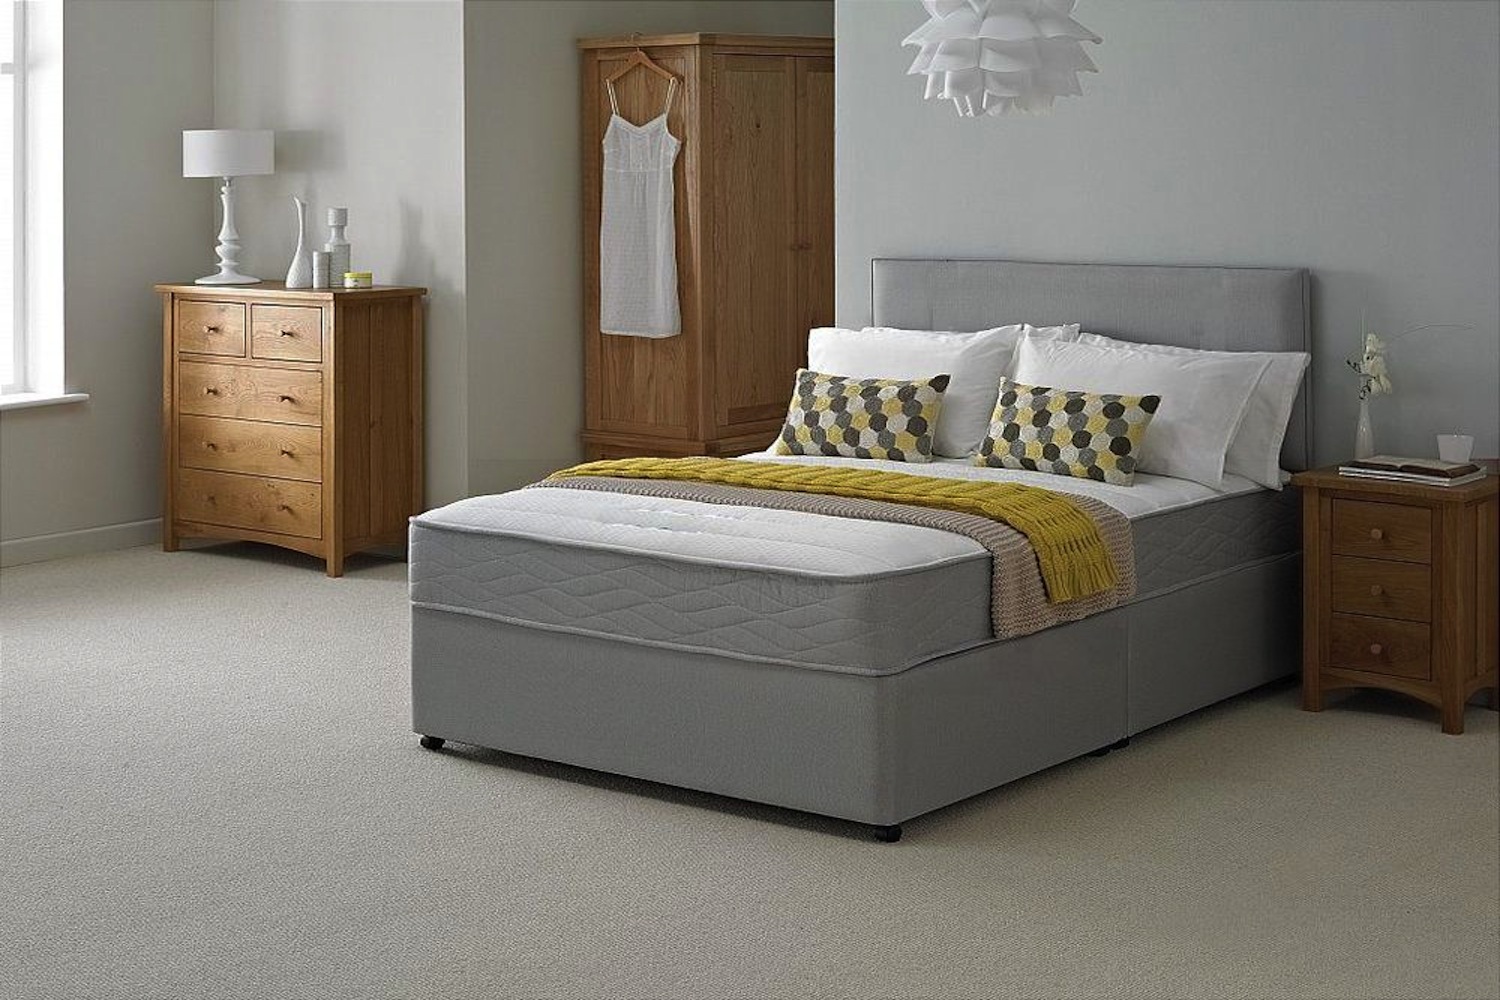 ChelseaGrey Fabric Divan Set with Headboard and Comfort Spring Memory Foam Mattress-Super King Size-4 Drawers